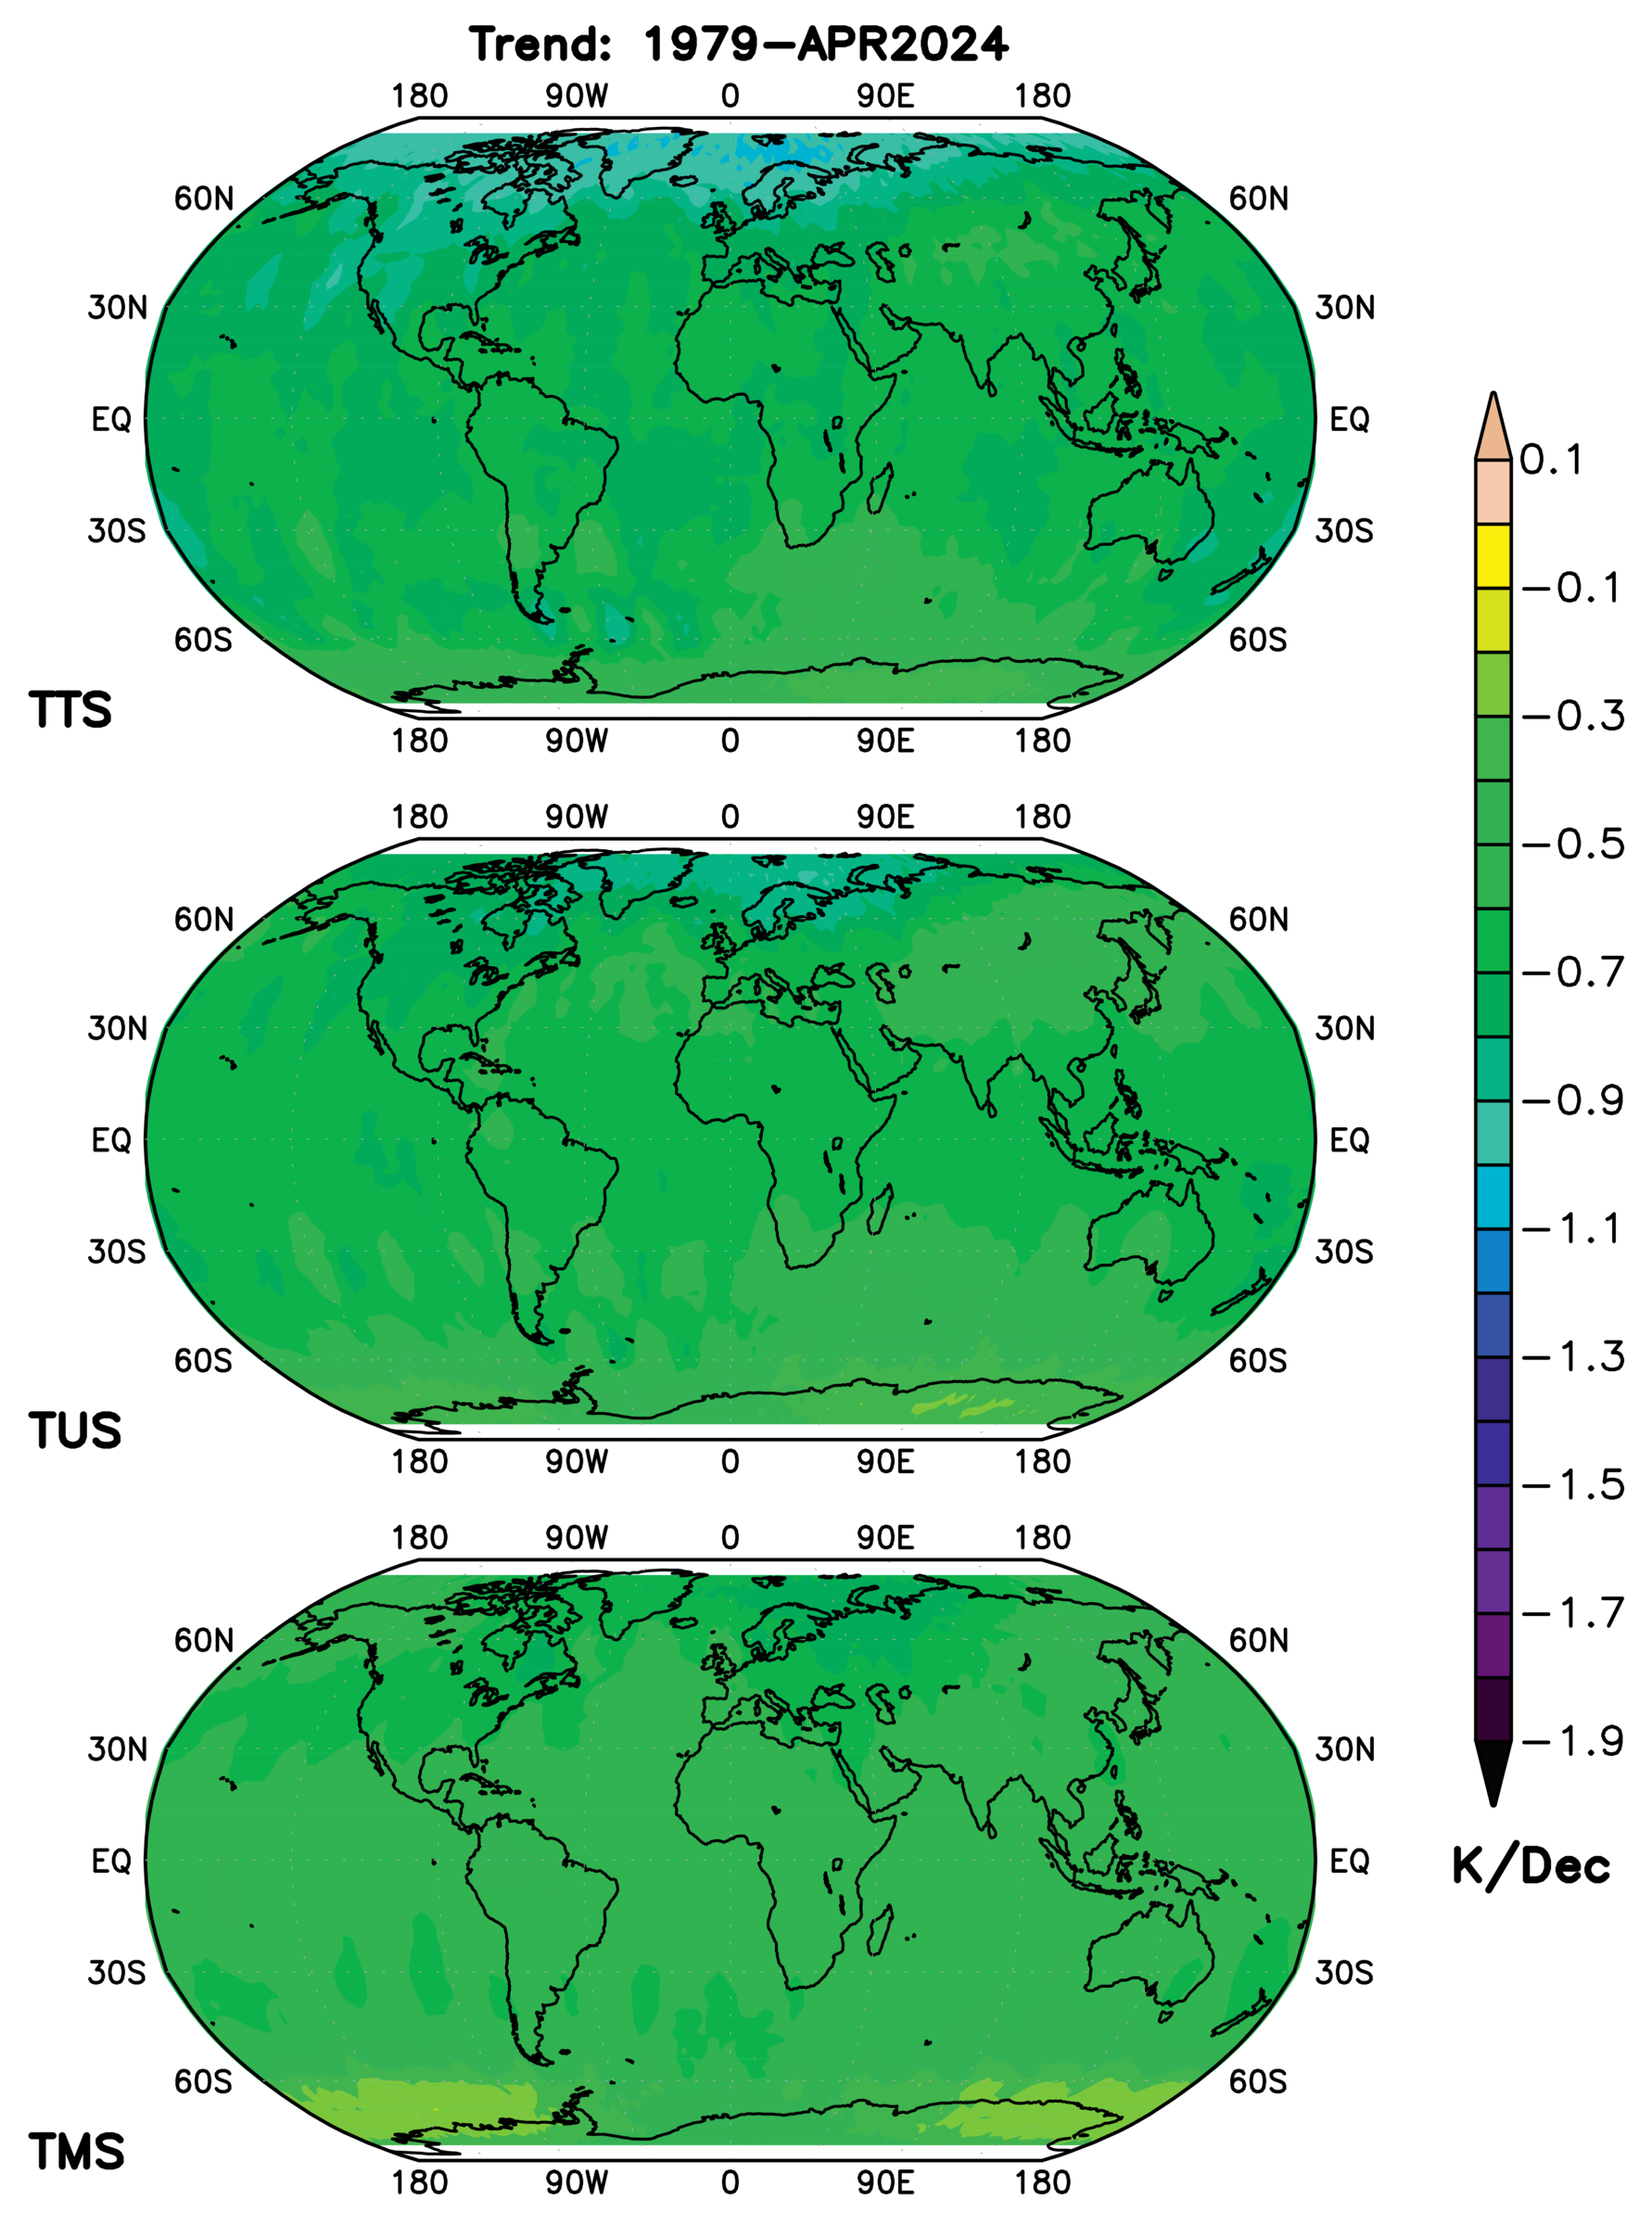 Spatial trend patterns from the NOAA SSU/AMSU-A/ATMS Version 3.0 monthly climate data record for layer temperatures of the mid-stratosphere (TMS,SSU Ch1), upper-stratosphere (TUS, SSU Ch2), and top-stratosphere (TTS, SSU Ch3) for the period from 1979 to the latest month.